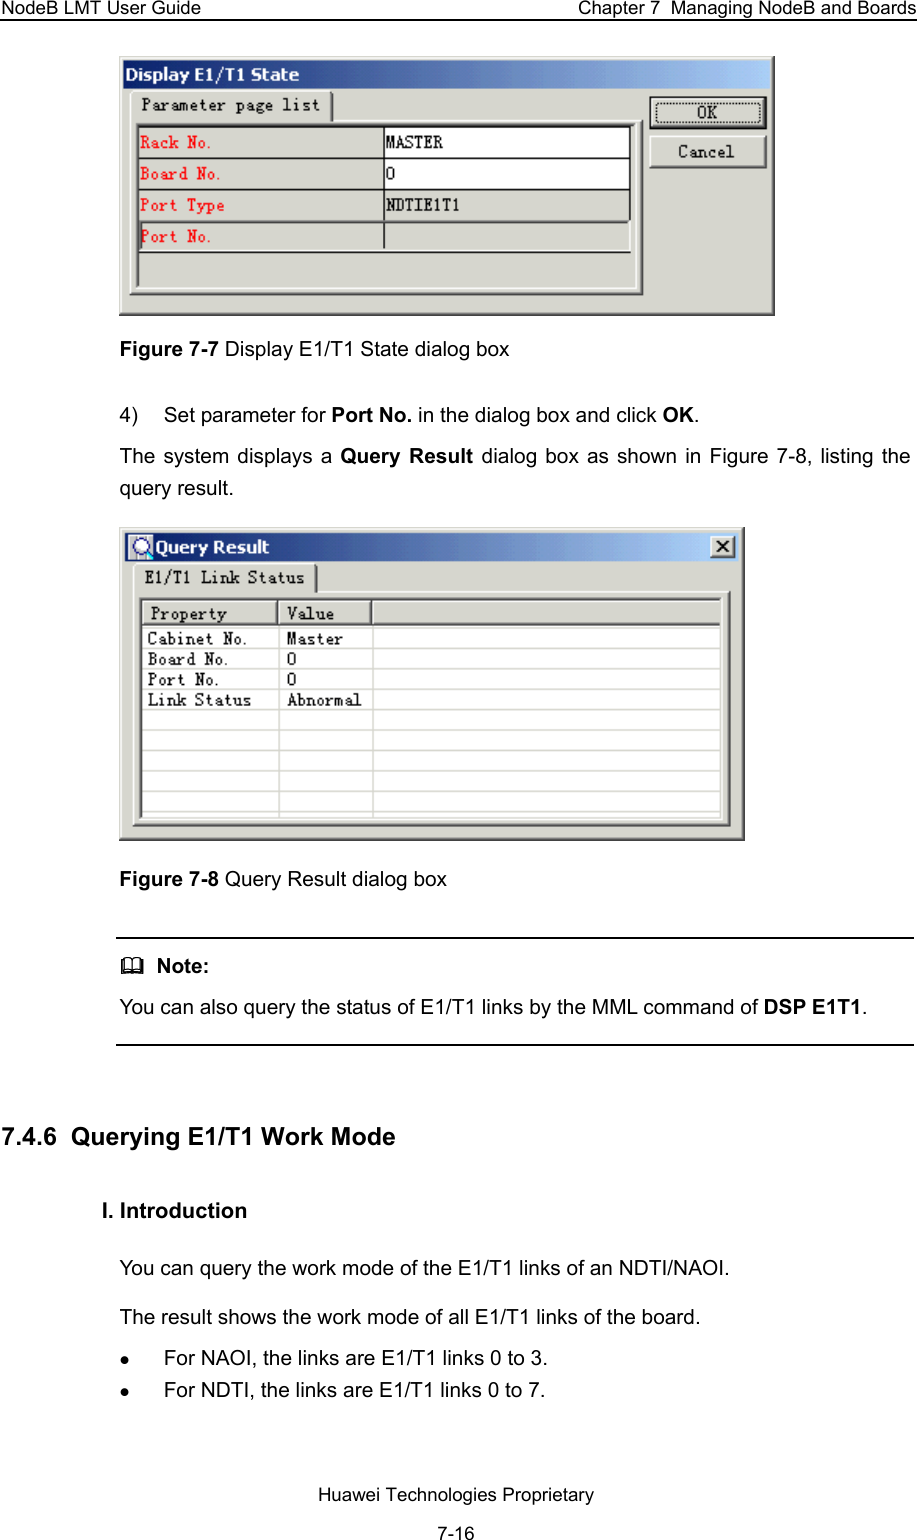 NodeB LMT User Guide  Chapter 7  Managing NodeB and Boards  Figure 7-7 Display E1/T1 State dialog box  4)  Set parameter for Port No. in the dialog box and click OK. The system displays a Query Result dialog box as shown in Figure 7-8, listing the query result.   Figure 7-8 Query Result dialog box    Note:  You can also query the status of E1/T1 links by the MML command of DSP E1T1.  7.4.6  Querying E1/T1 Work Mode I. Introduction  You can query the work mode of the E1/T1 links of an NDTI/NAOI. The result shows the work mode of all E1/T1 links of the board.  z For NAOI, the links are E1/T1 links 0 to 3.  z For NDTI, the links are E1/T1 links 0 to 7.  Huawei Technologies Proprietary 7-16 